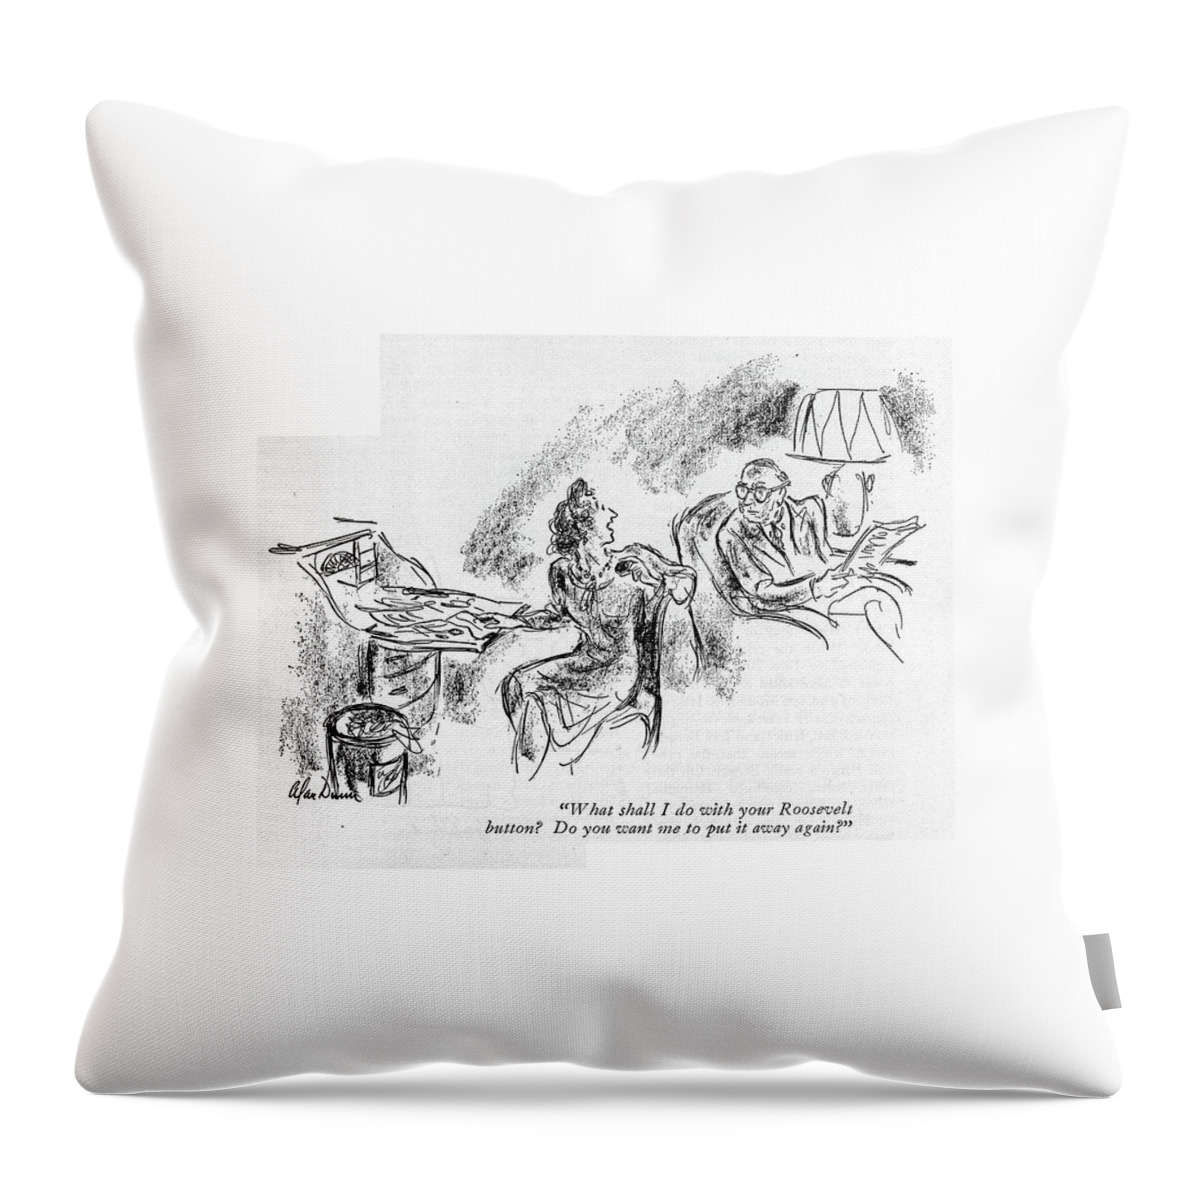 What Shall I Do With Your Roosevelt Button? Throw Pillow